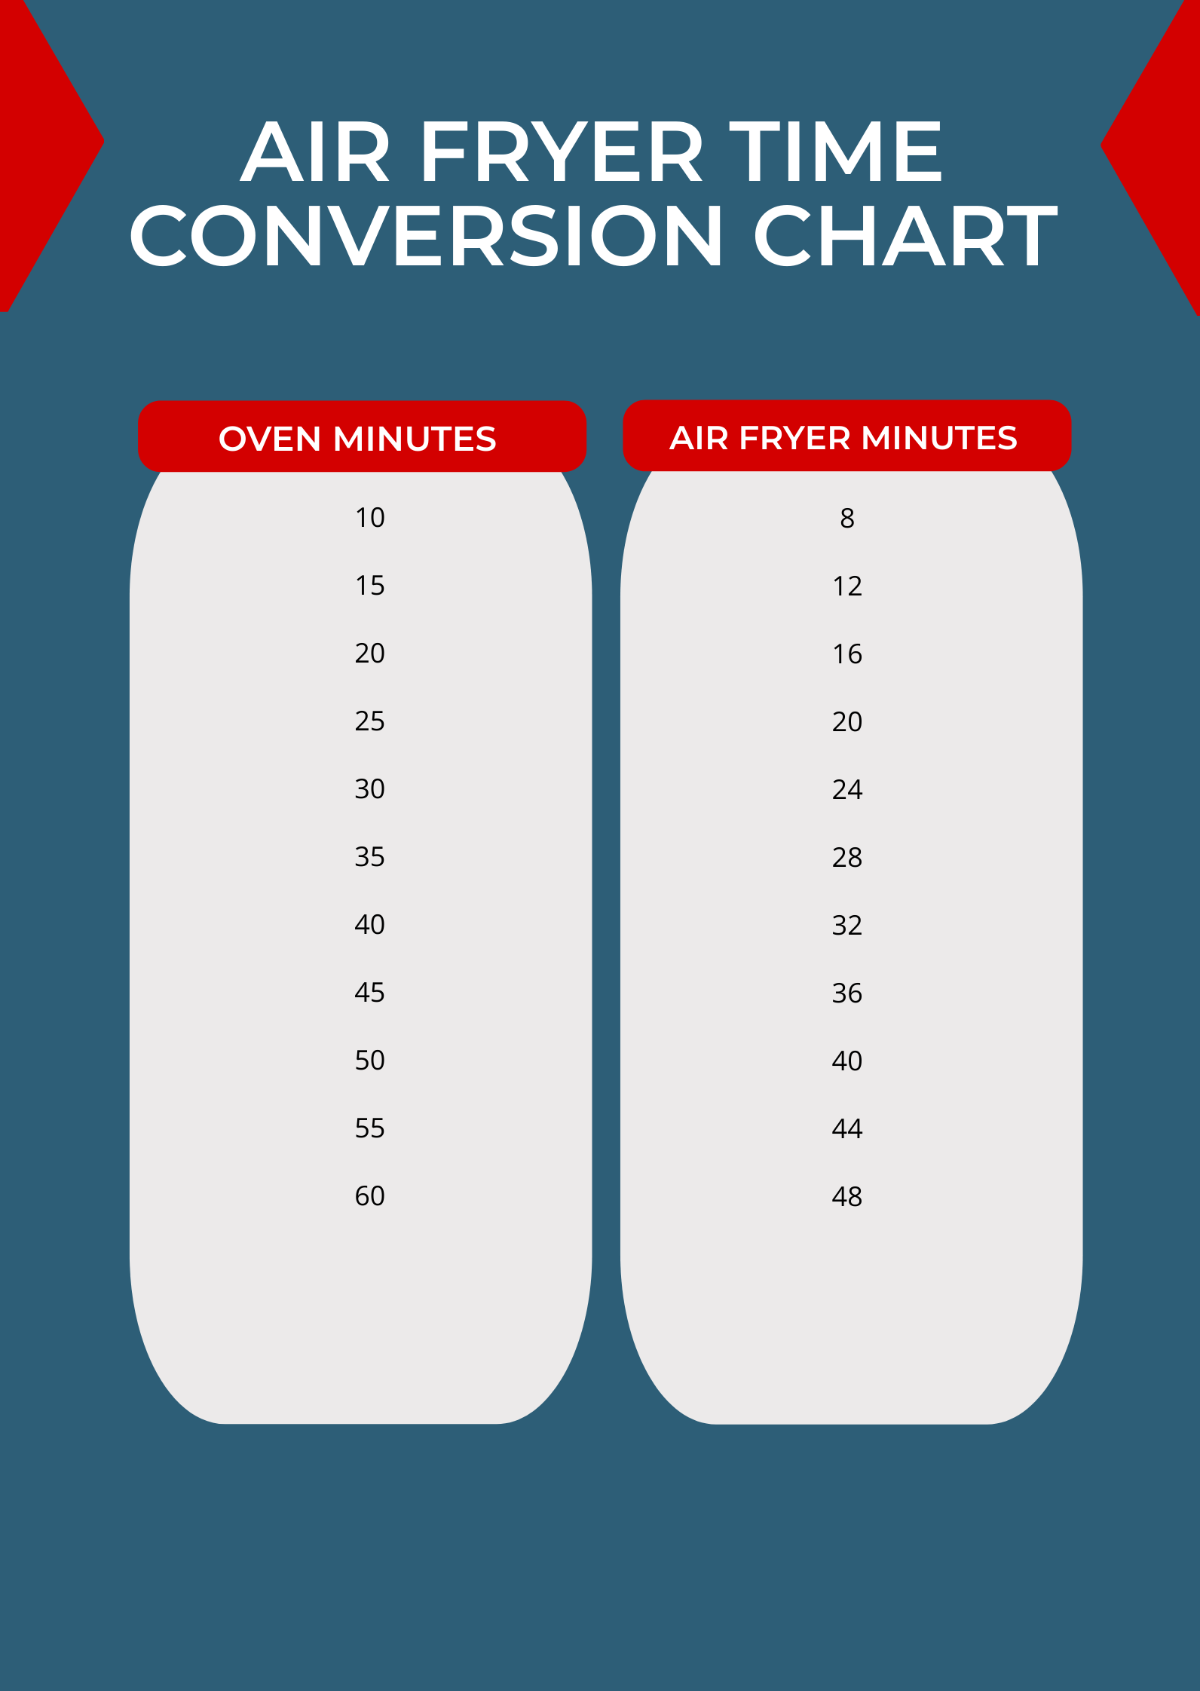 Air Fryer Time Conversion Chart Template